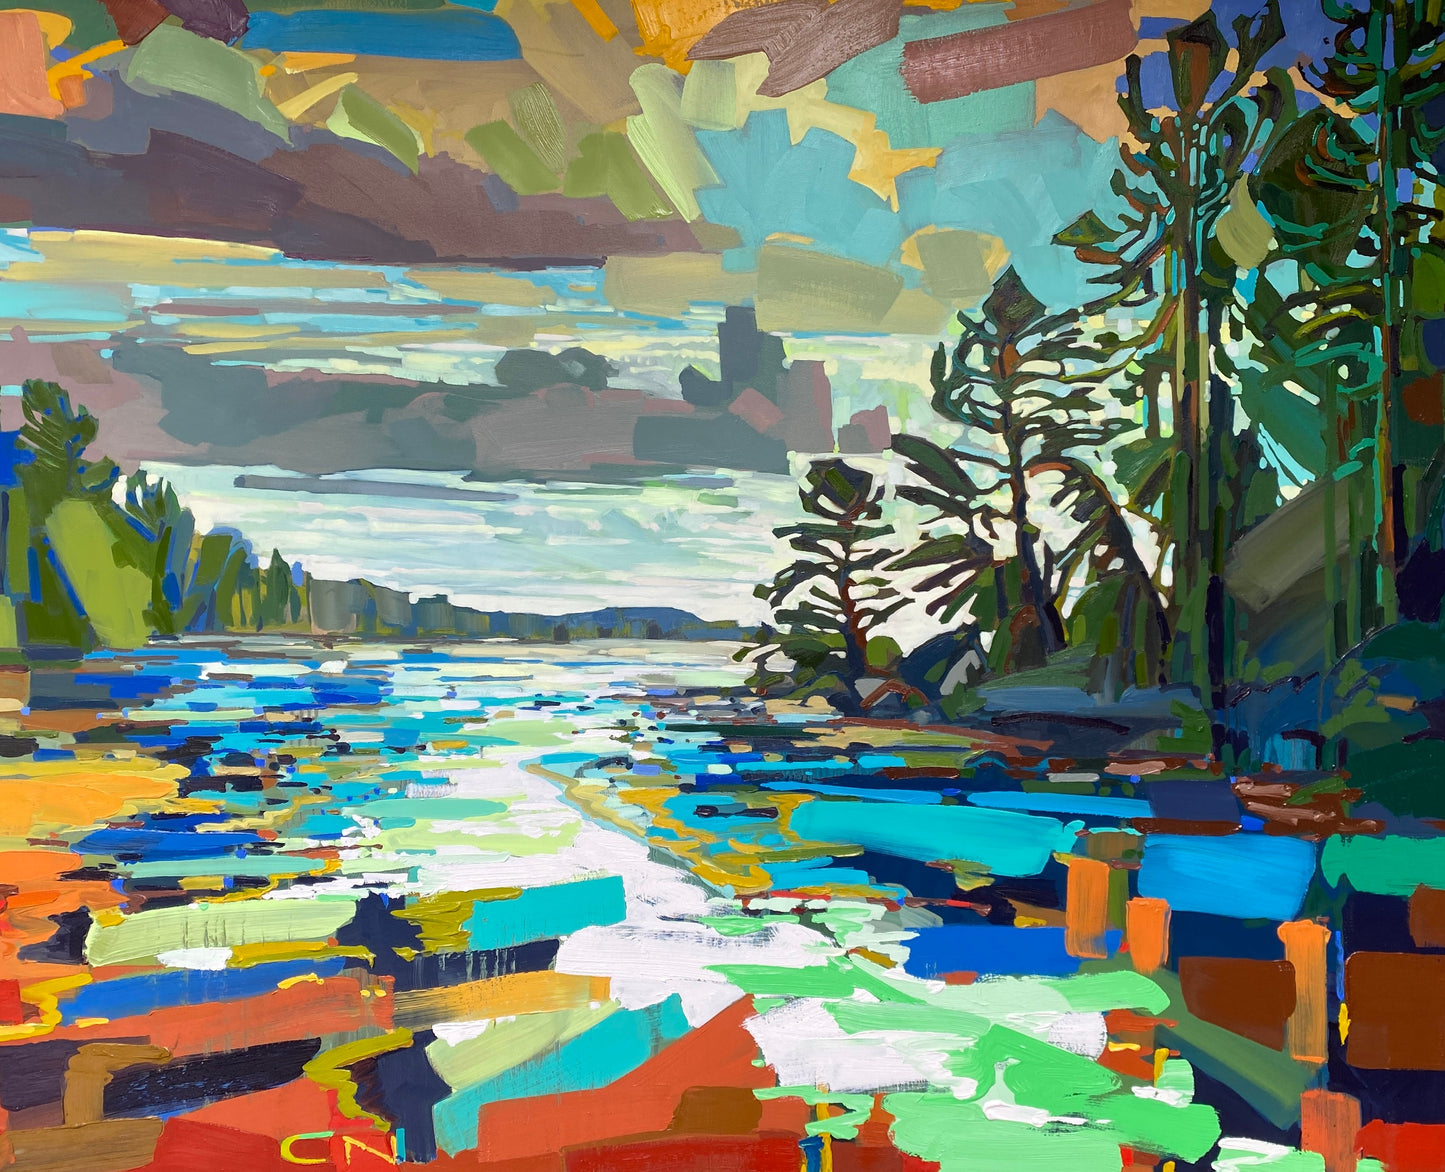 Middle Beach, Tofino, Vanouver Island, BC original Canadian art by Chrissy Nickerson